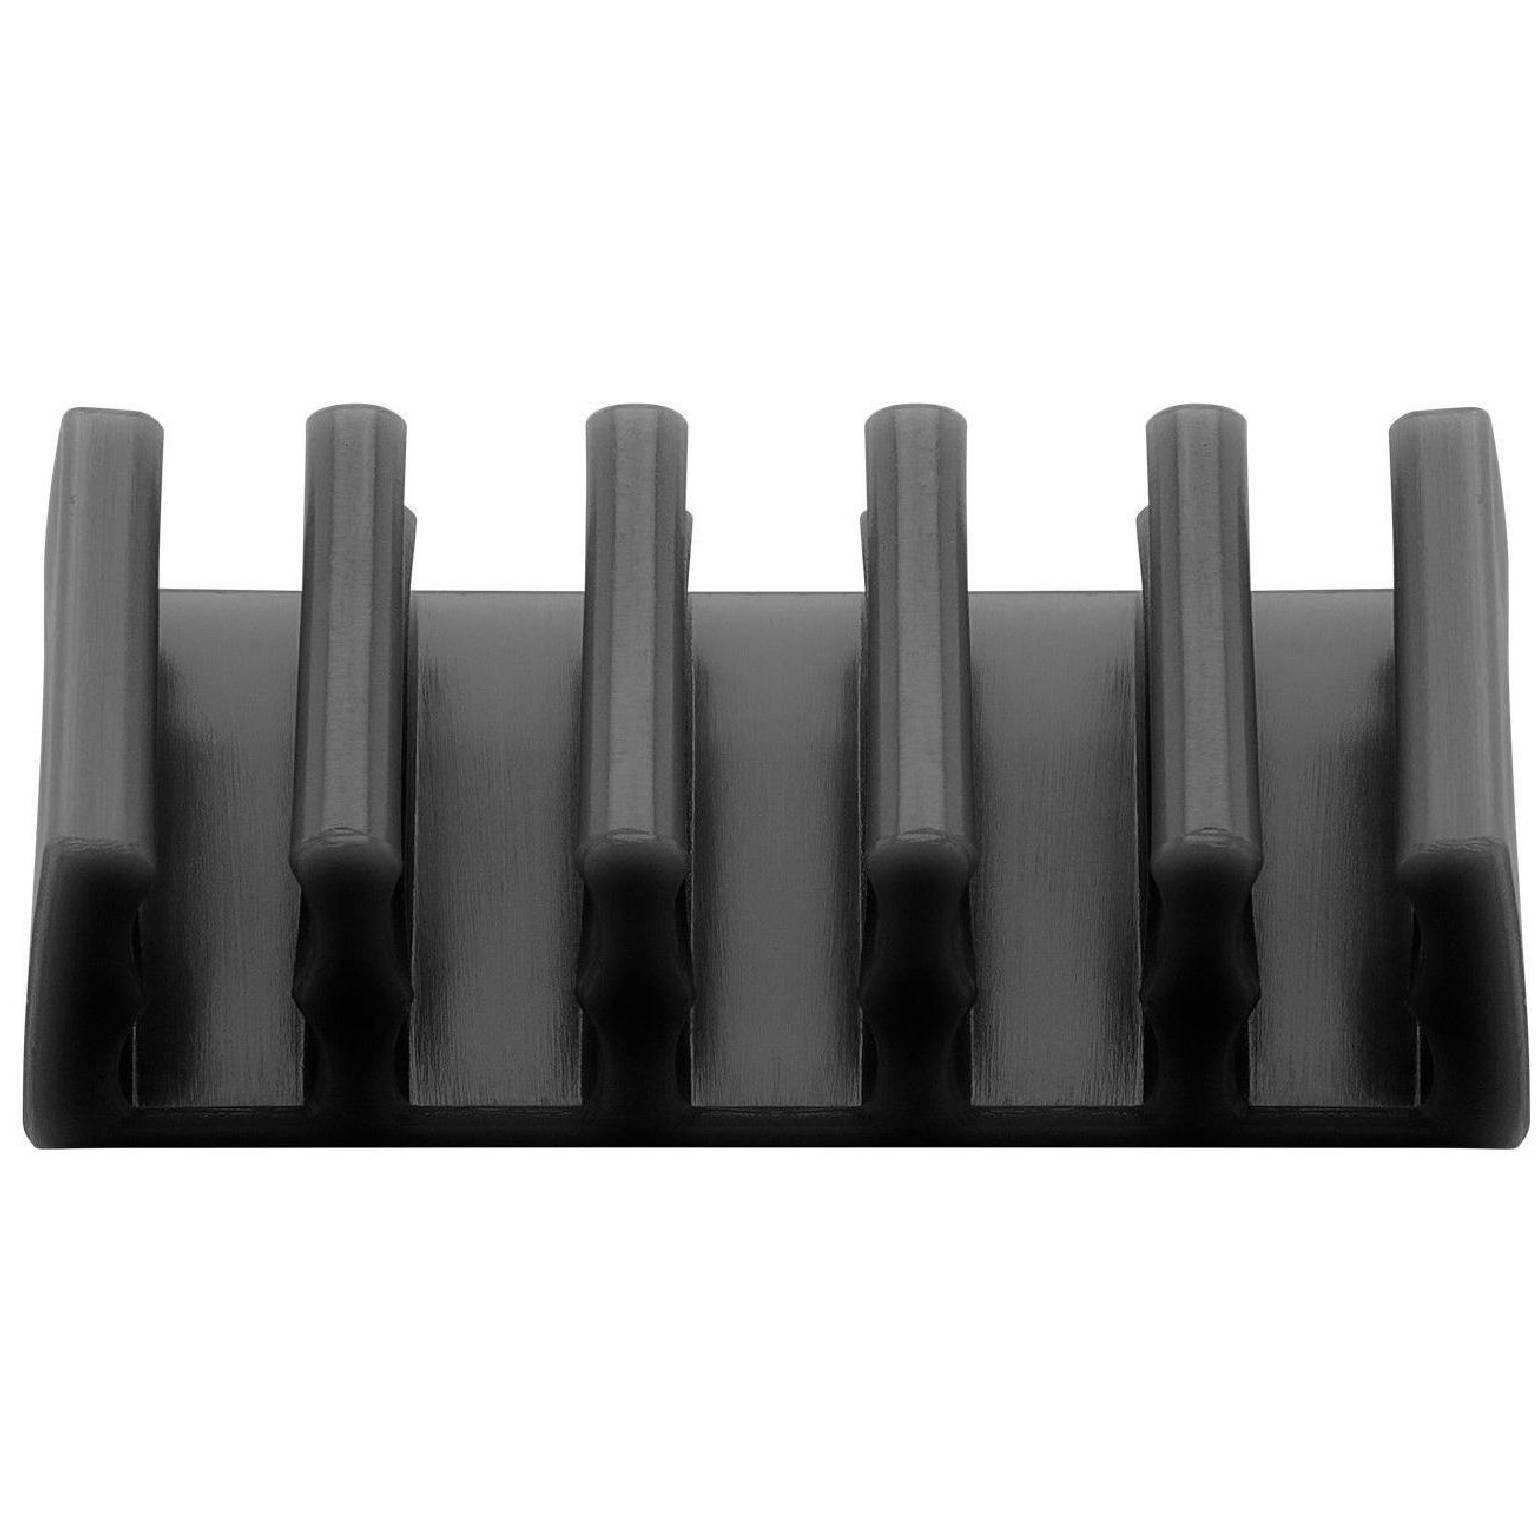 5-slot cable management, black 2-piece set for organising and attaching - Goobay